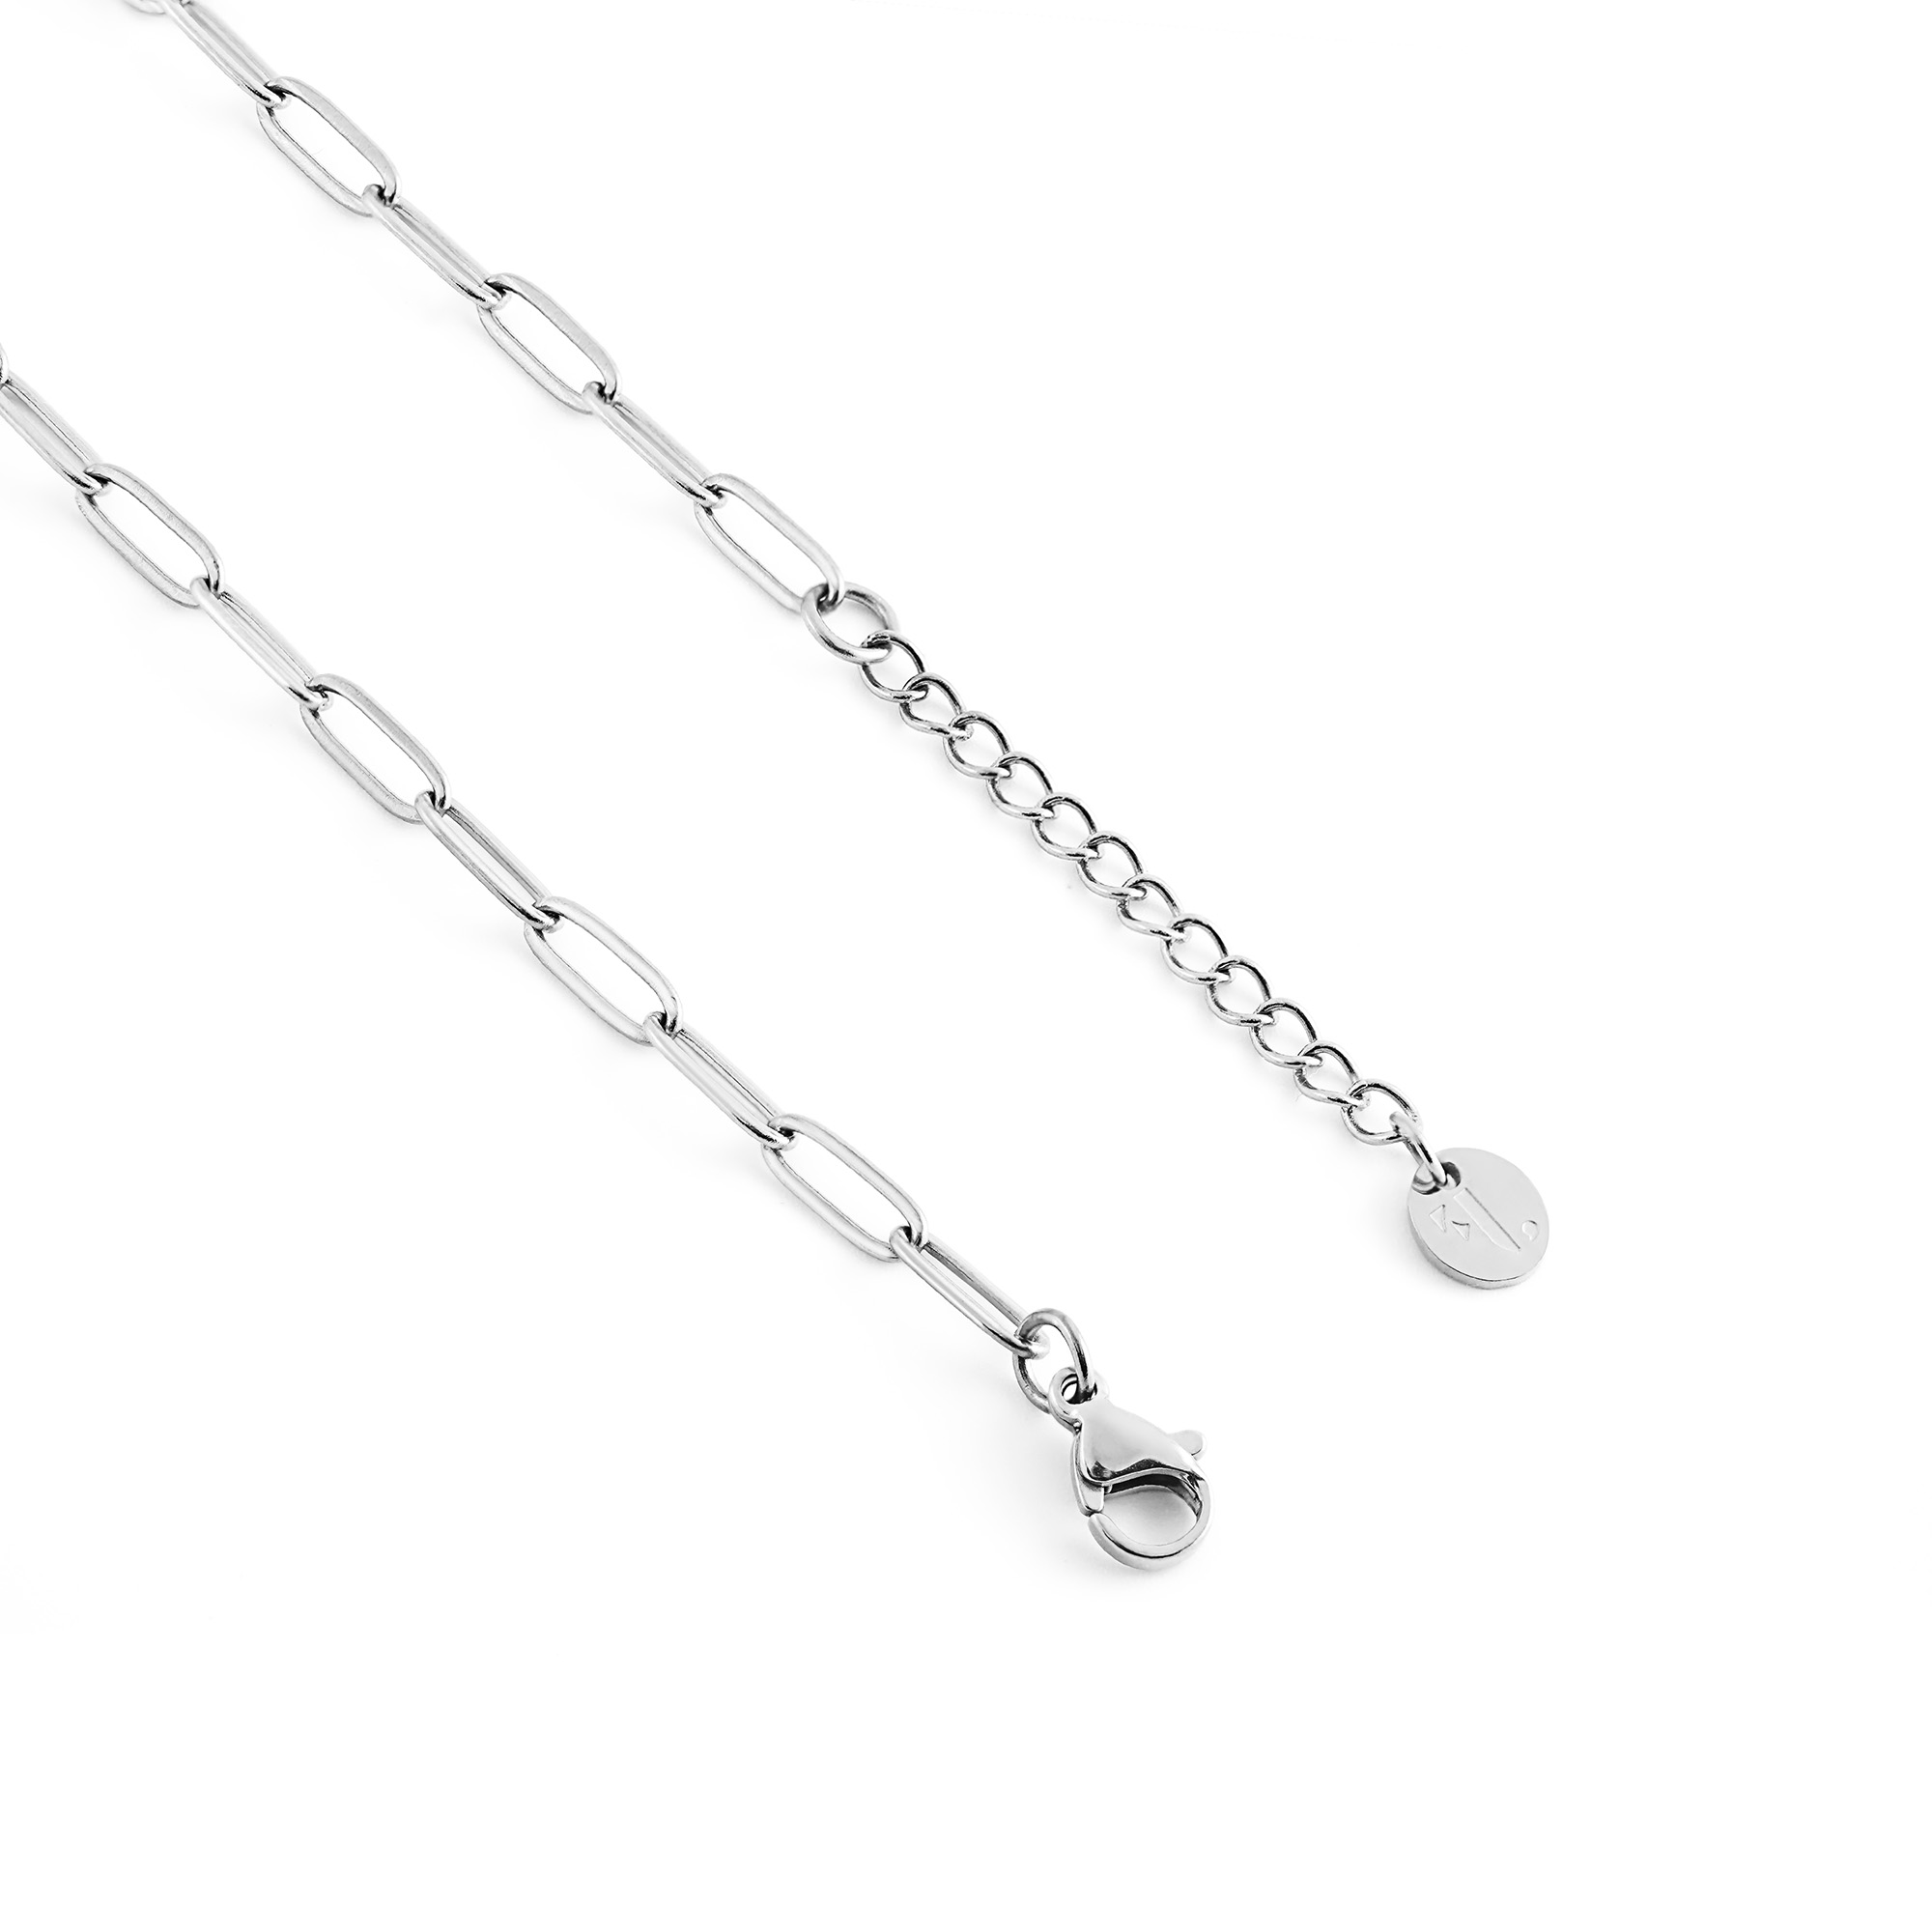 Maritsa women's bracelet by Five Jwlry, crafted from a 3mm paperclip chain in silver-colored, water-resistant 316L stainless steel. Available in size 16cm with a 4cm extension. Hypoallergenic with a 2-year warranty.